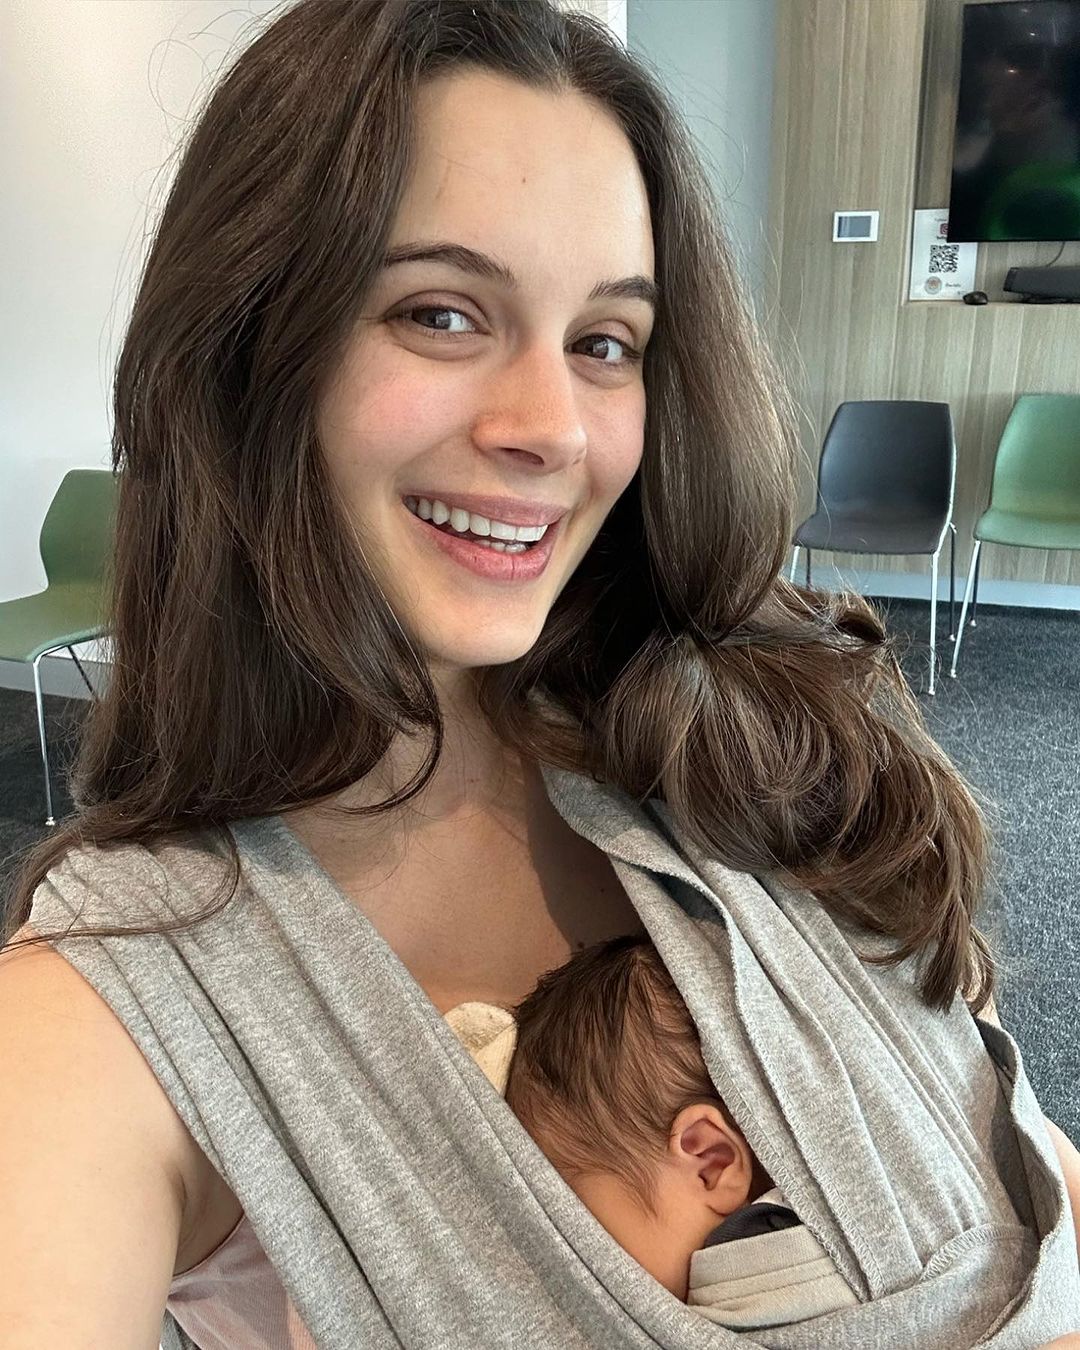 Evelyn-Sharma-holds-her-baby-boy-close-in-adorable-photo